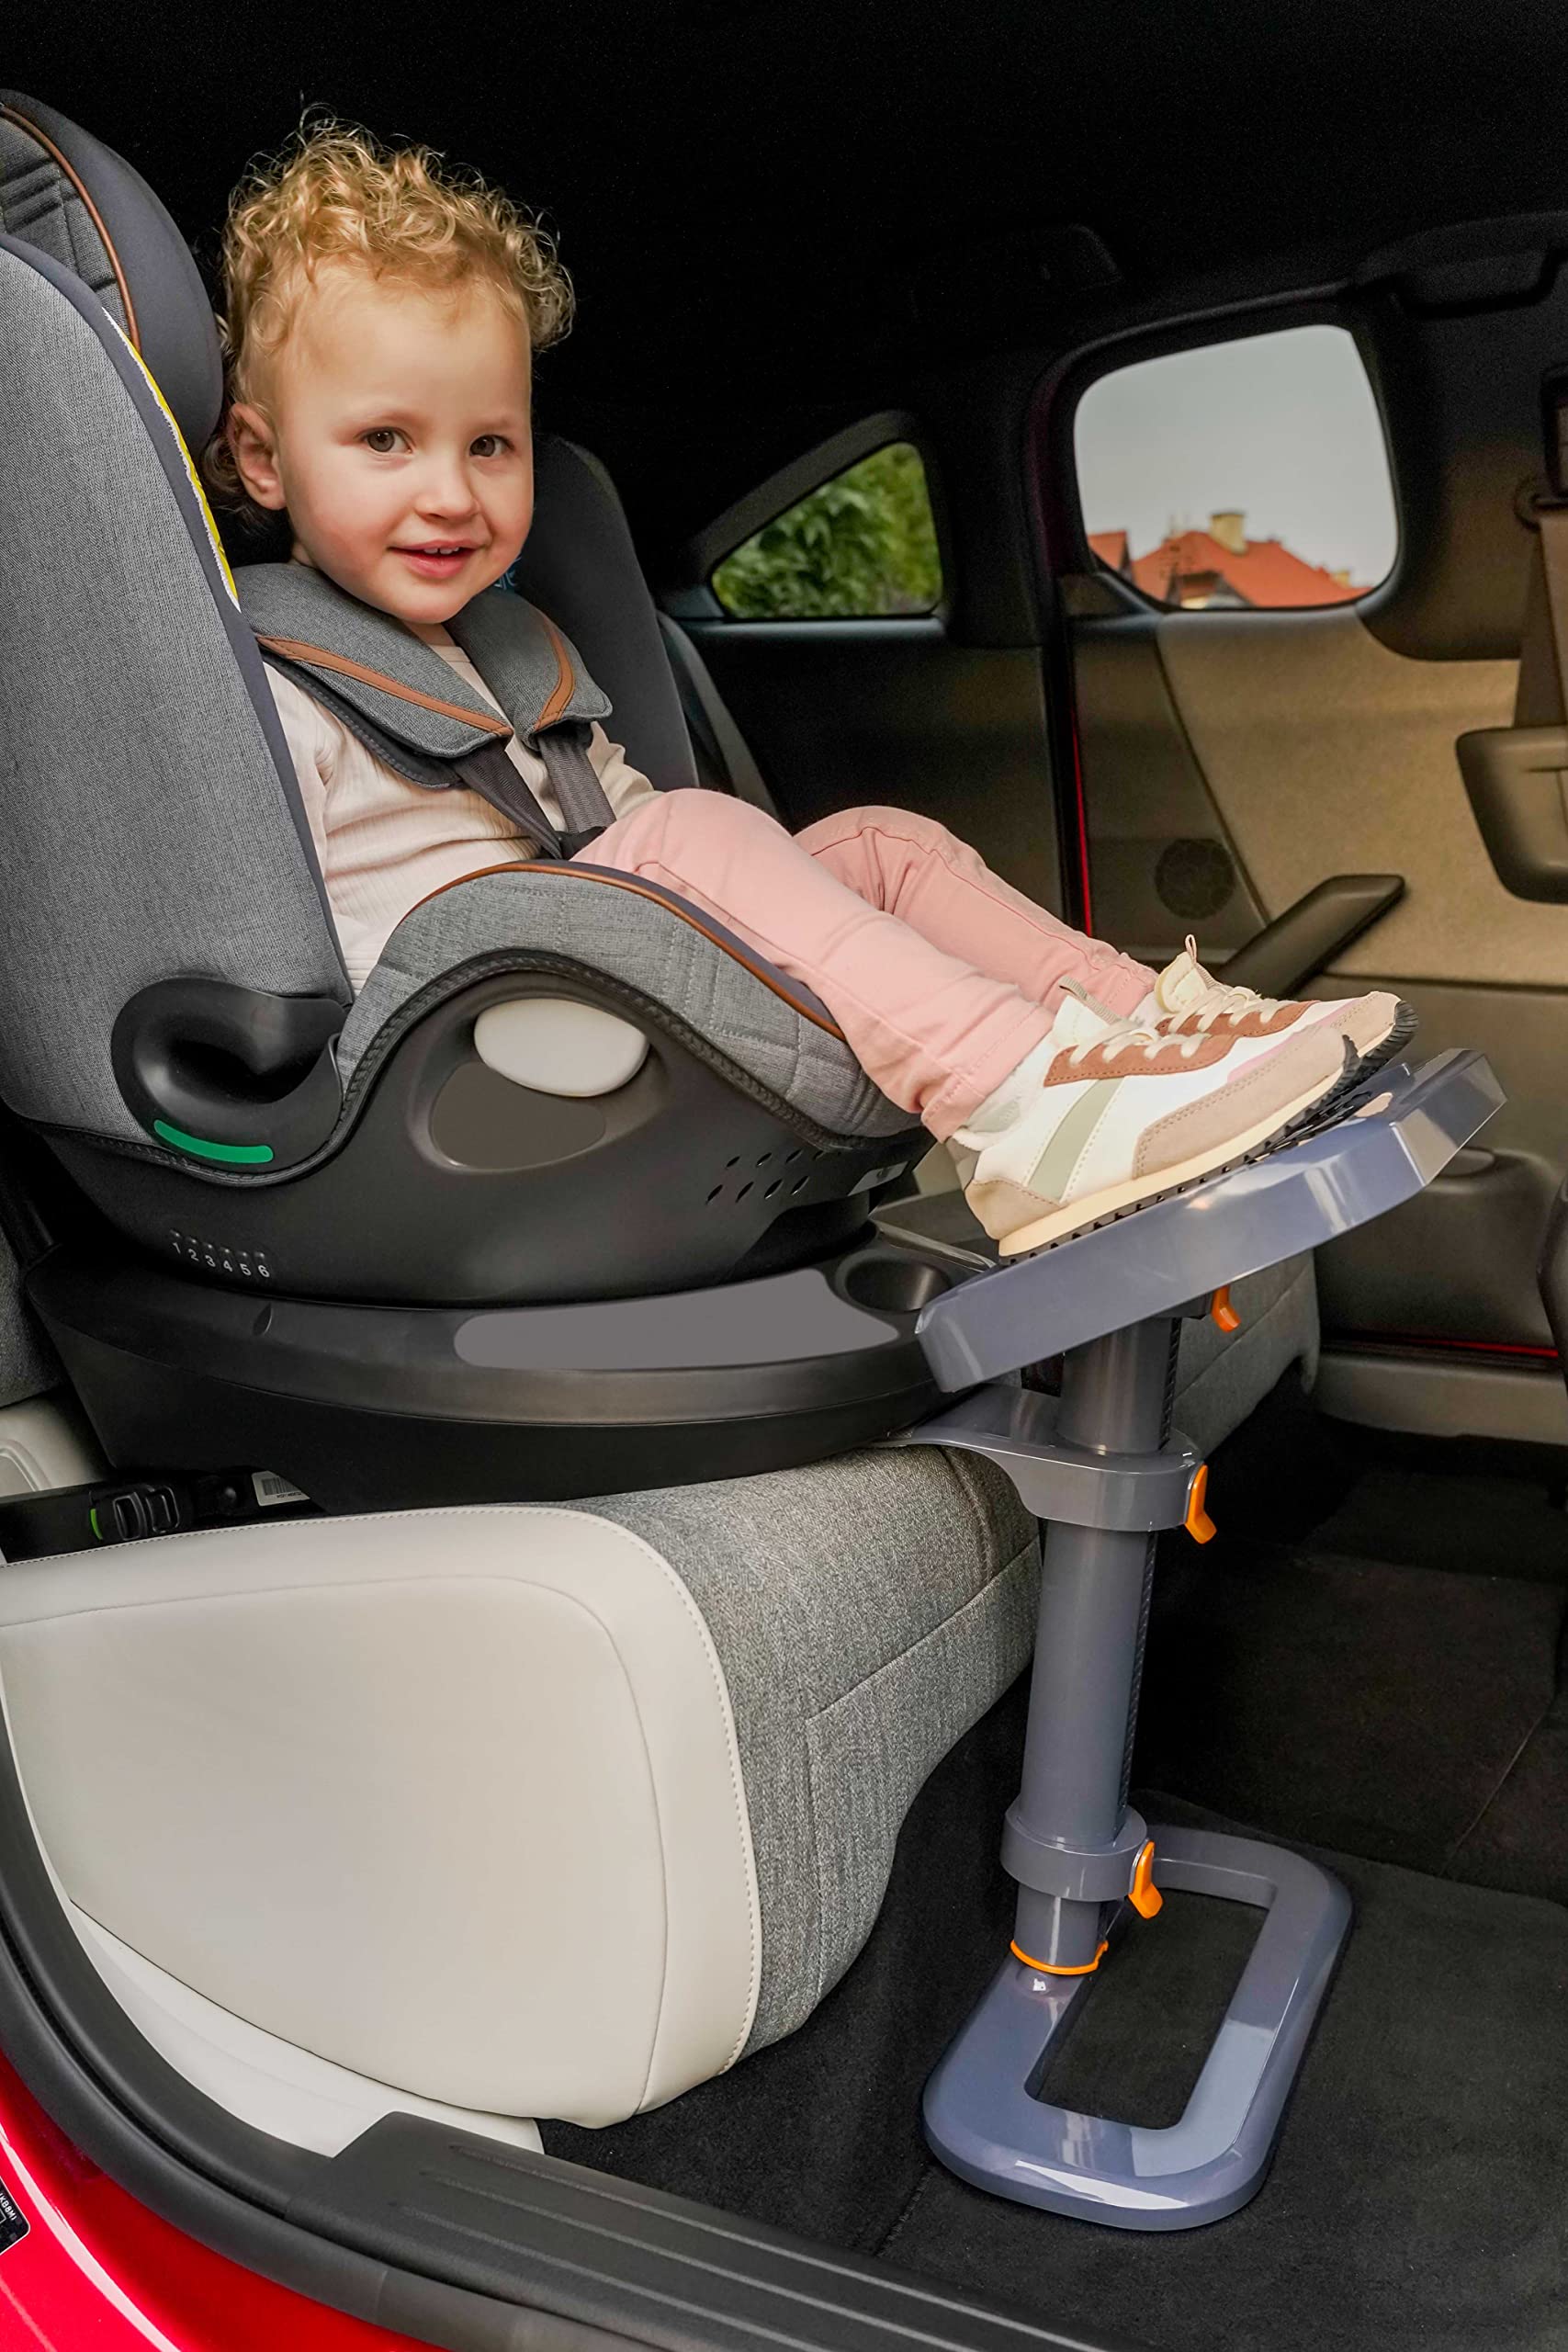 Kneeguard Kids Car Seat Foot Rest for Children and Babies. Footrest is Compatible with Toddler Booster Seats for Easy, Safe Travel. Great Travel Accessory for Easy Travel. (Latest Version)